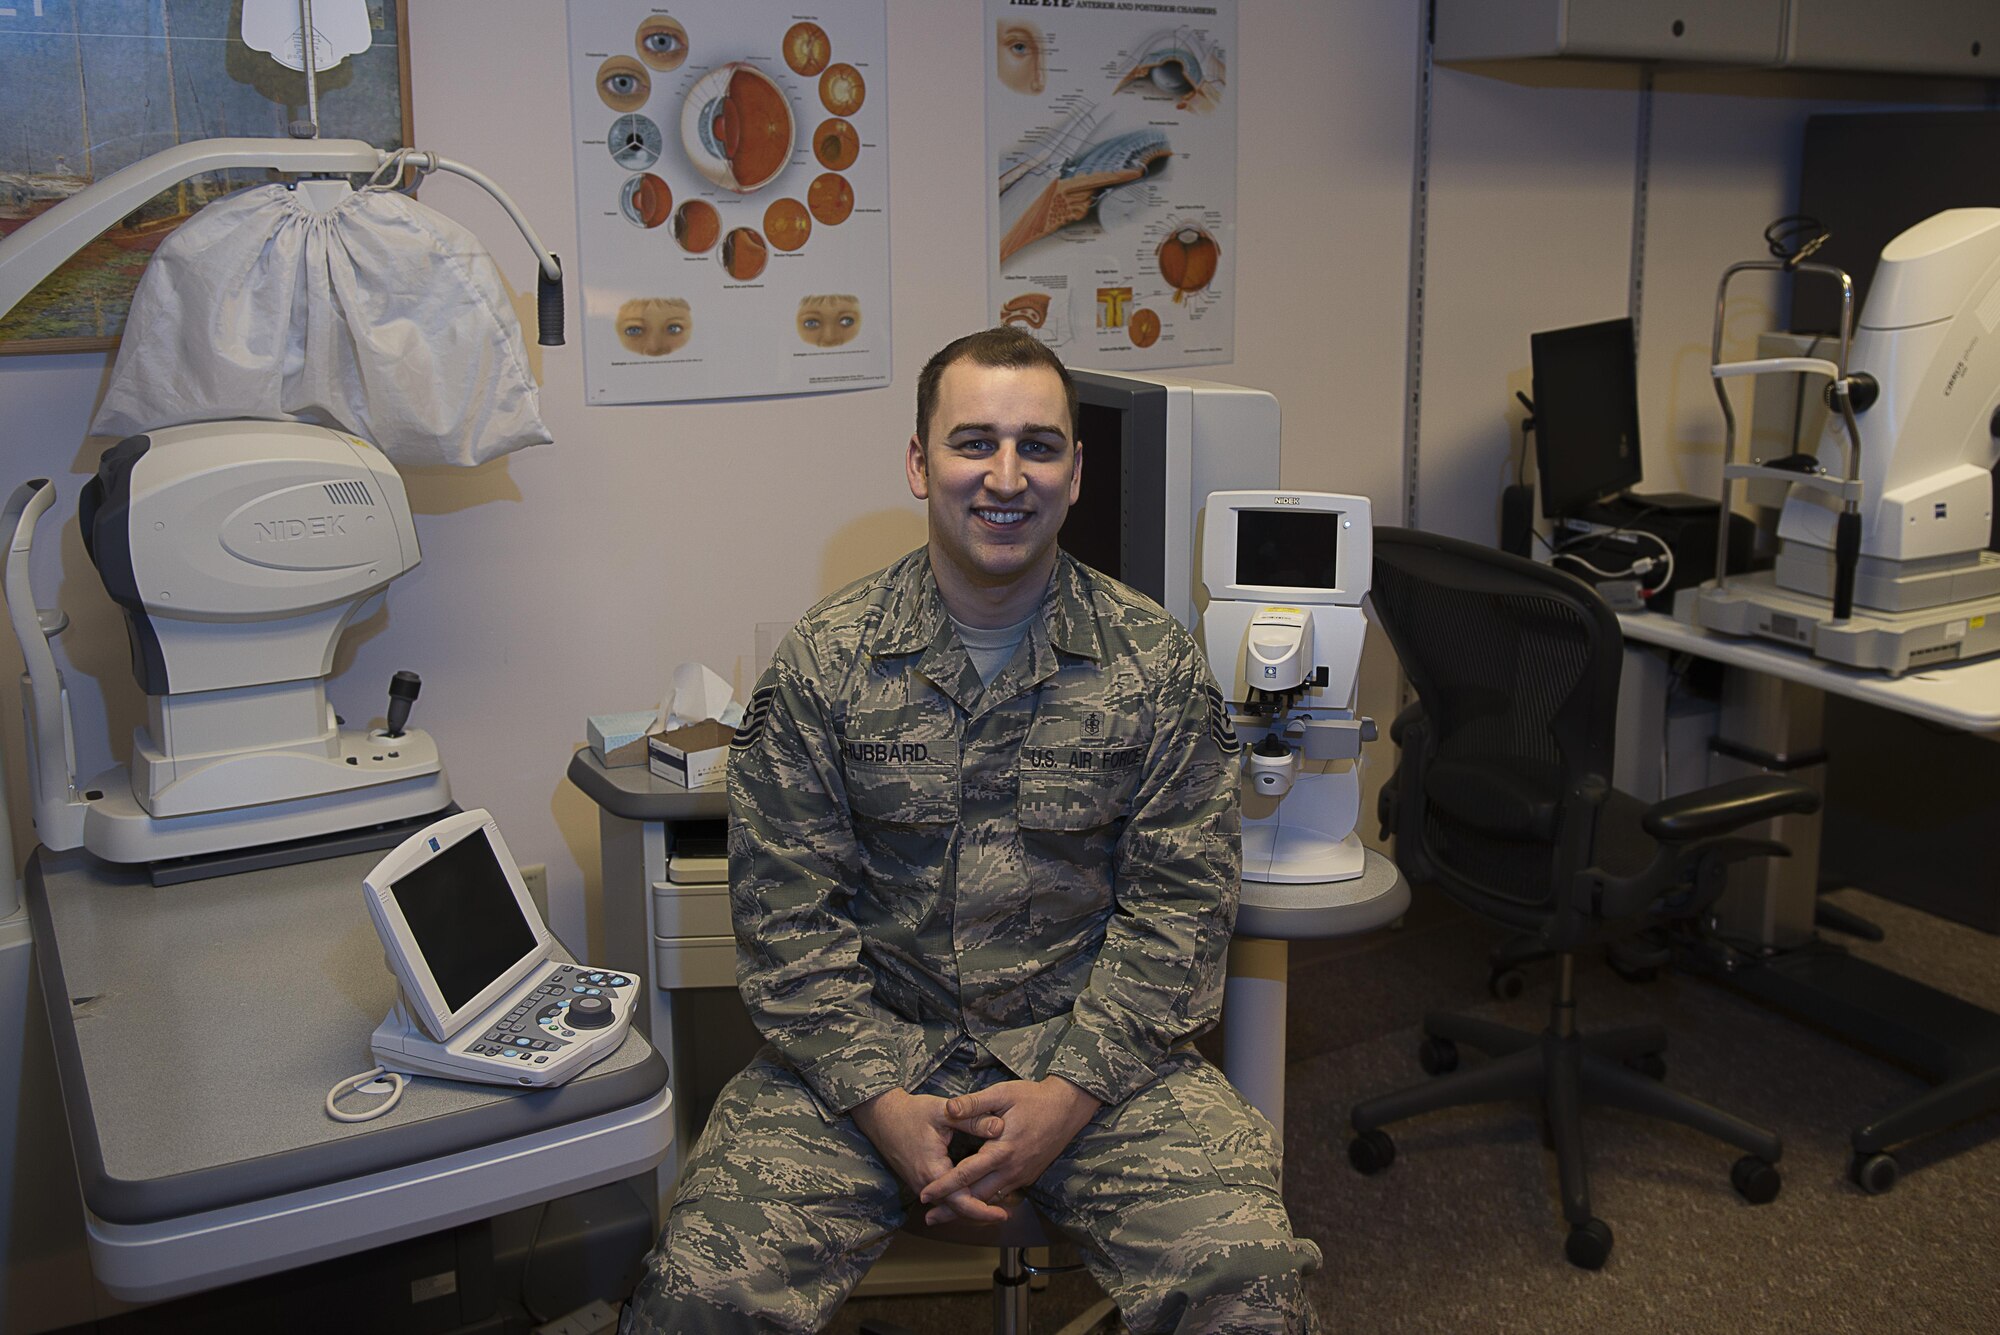 U.S. Air Force Tech. Sgt. Nicholas Hubbard, a 354th Medical Operations Squadron optometry technician, poses for a photo April 5, 2017, at Eielson Air Force Base, Alaska. Hubbard served in the Air Force for 11 years as an optometry technician. (U.S. Air Force photo by Airman Eric M. Fisher)